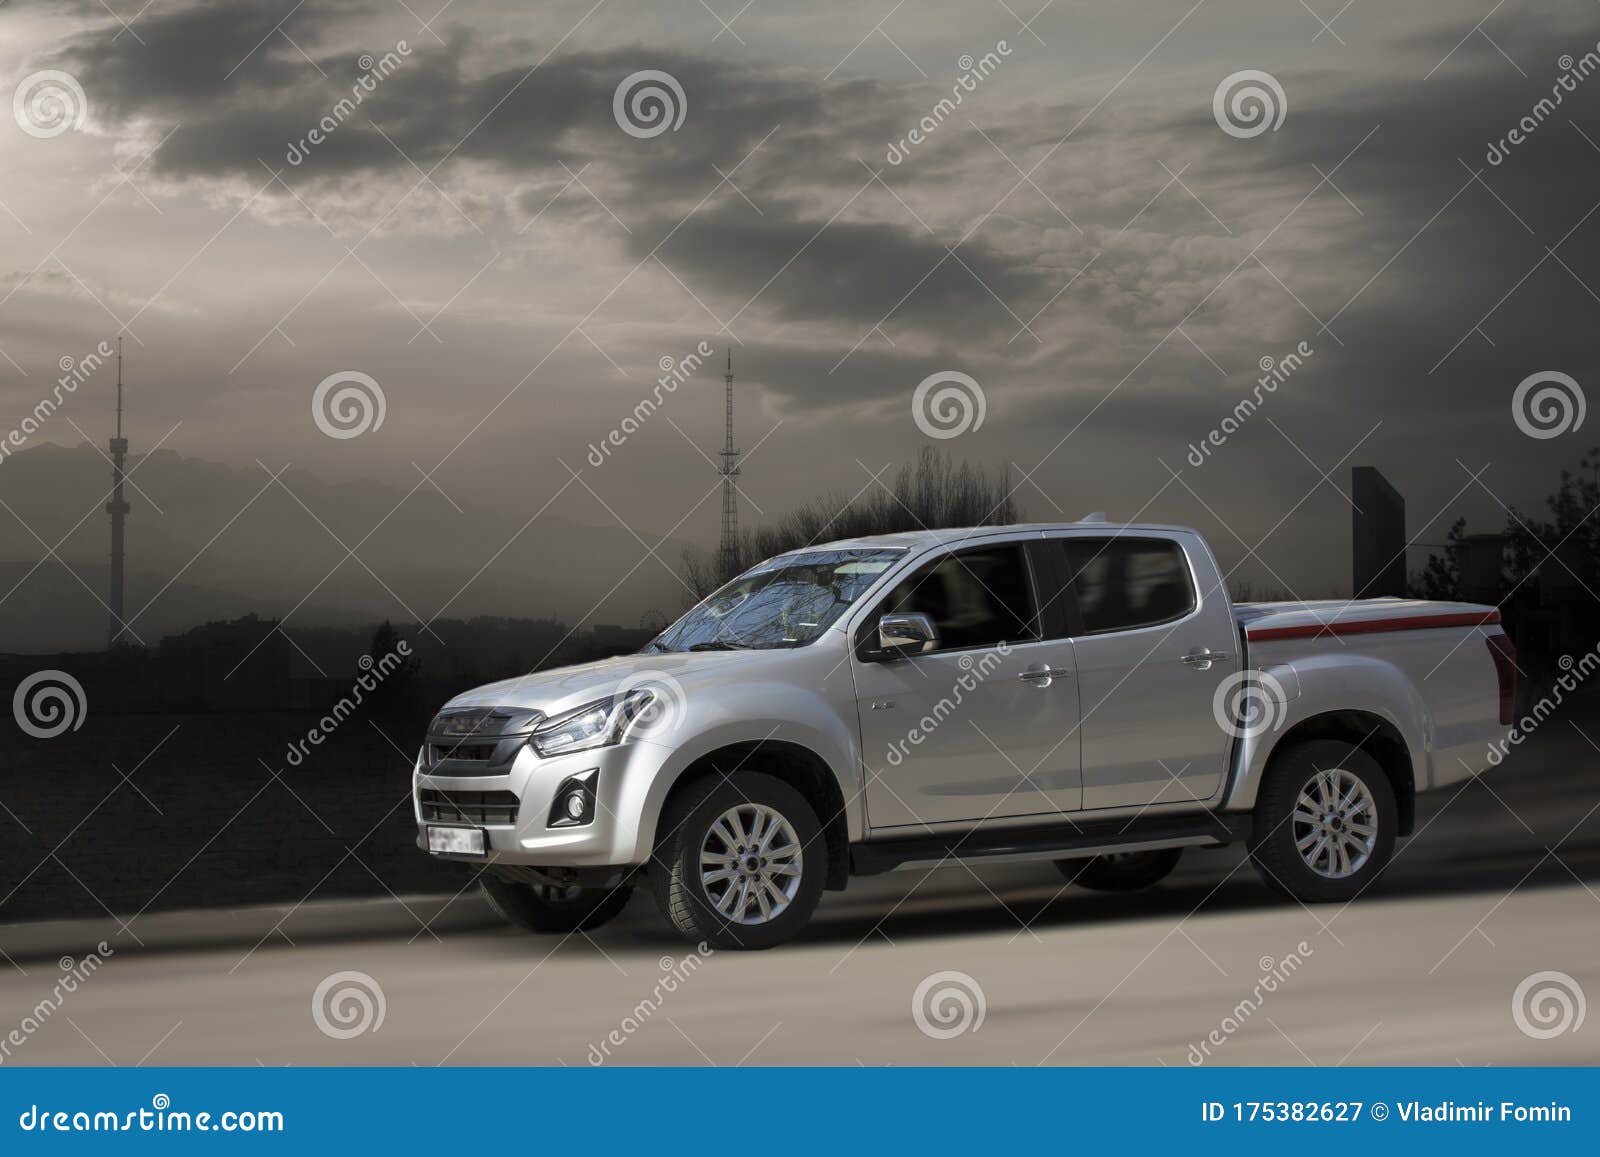 Download 1 002 Isuzu Pickup Photos Free Royalty Free Stock Photos From Dreamstime PSD Mockup Templates